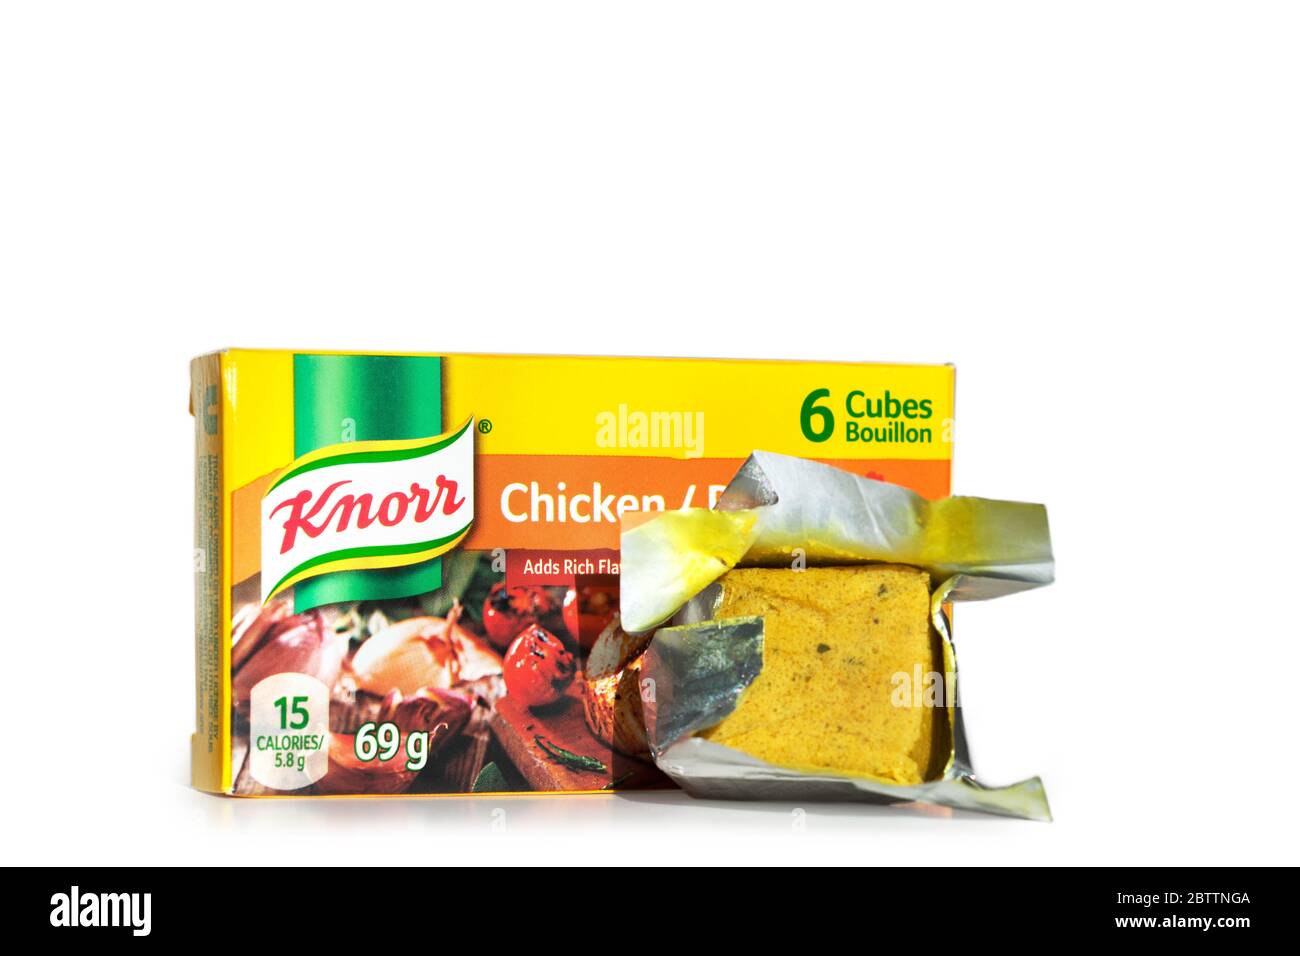 Knorr Stock Cubes, Soup Base, Chicken Stock Photo